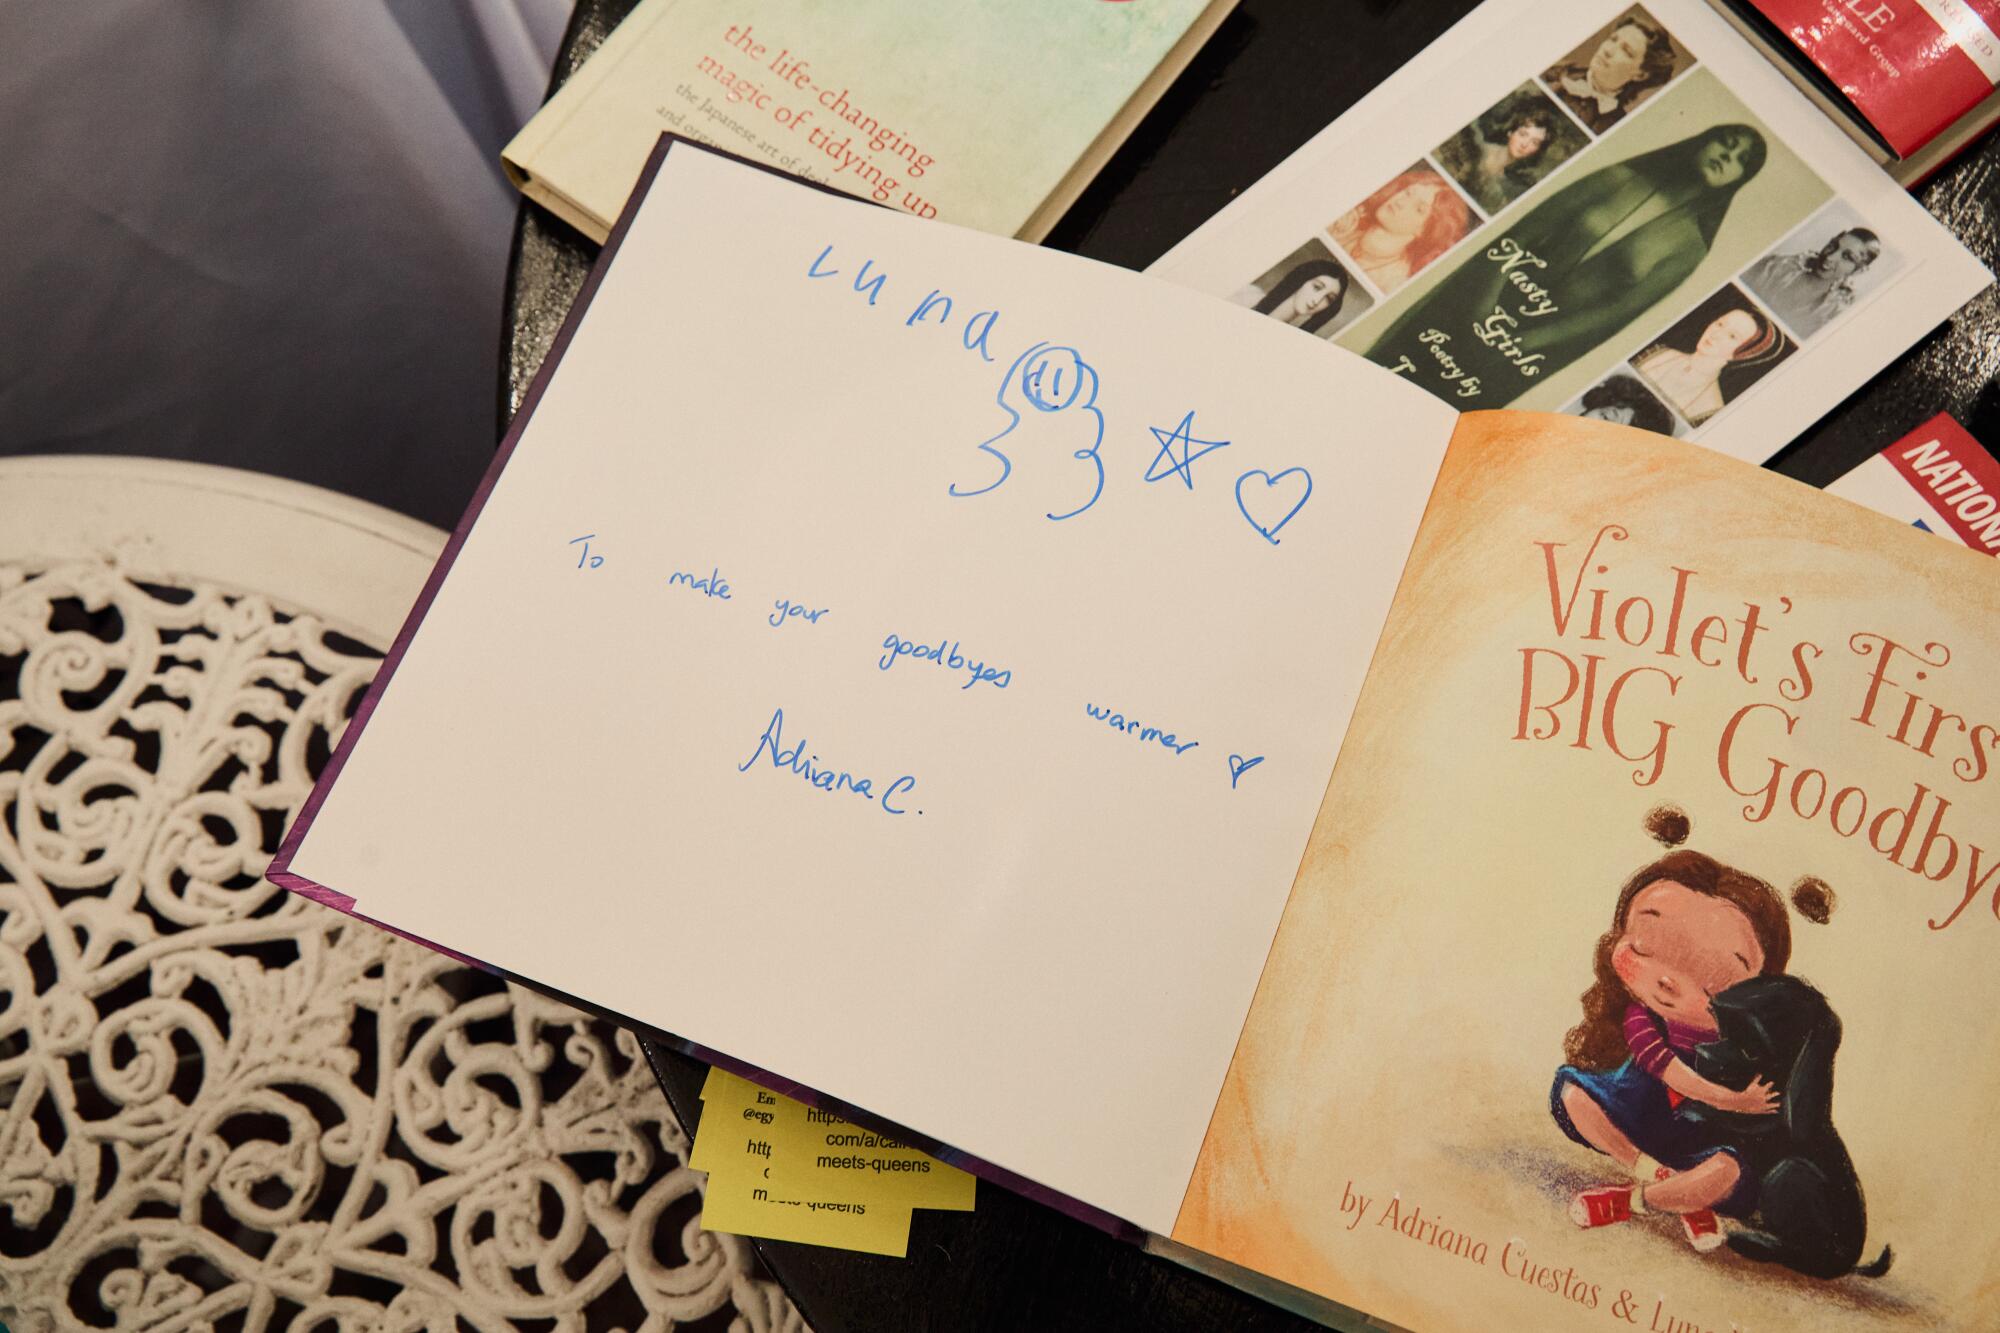 A signed copy of "Violet's first big goodbye" by Luna Yanez-Cuestas is on a table in the Libros bookstore.